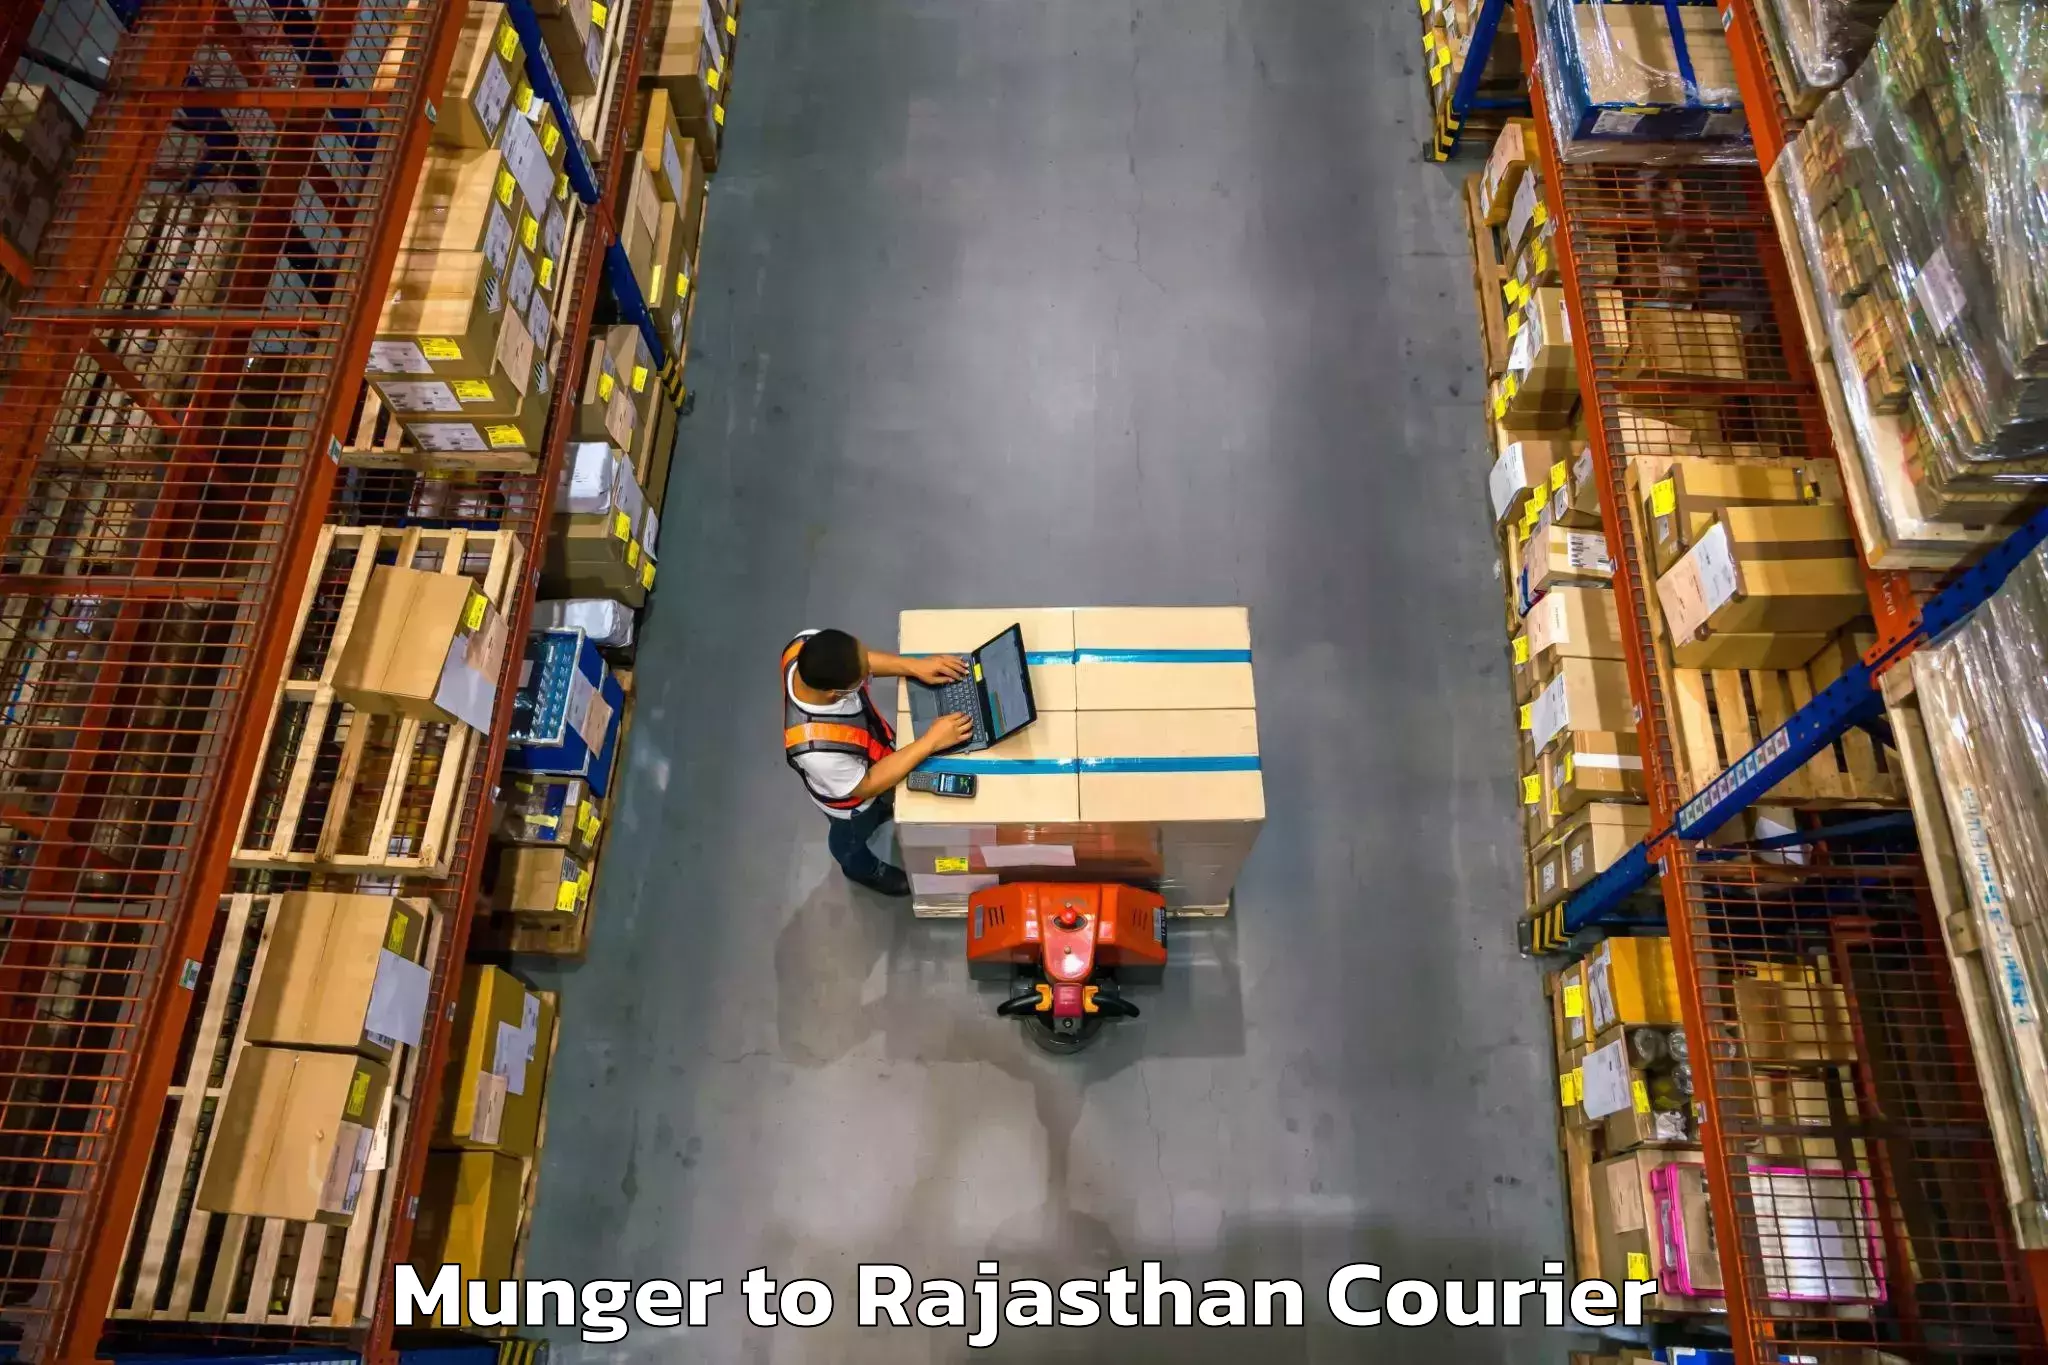 Courier service innovation Munger to Rajasthan